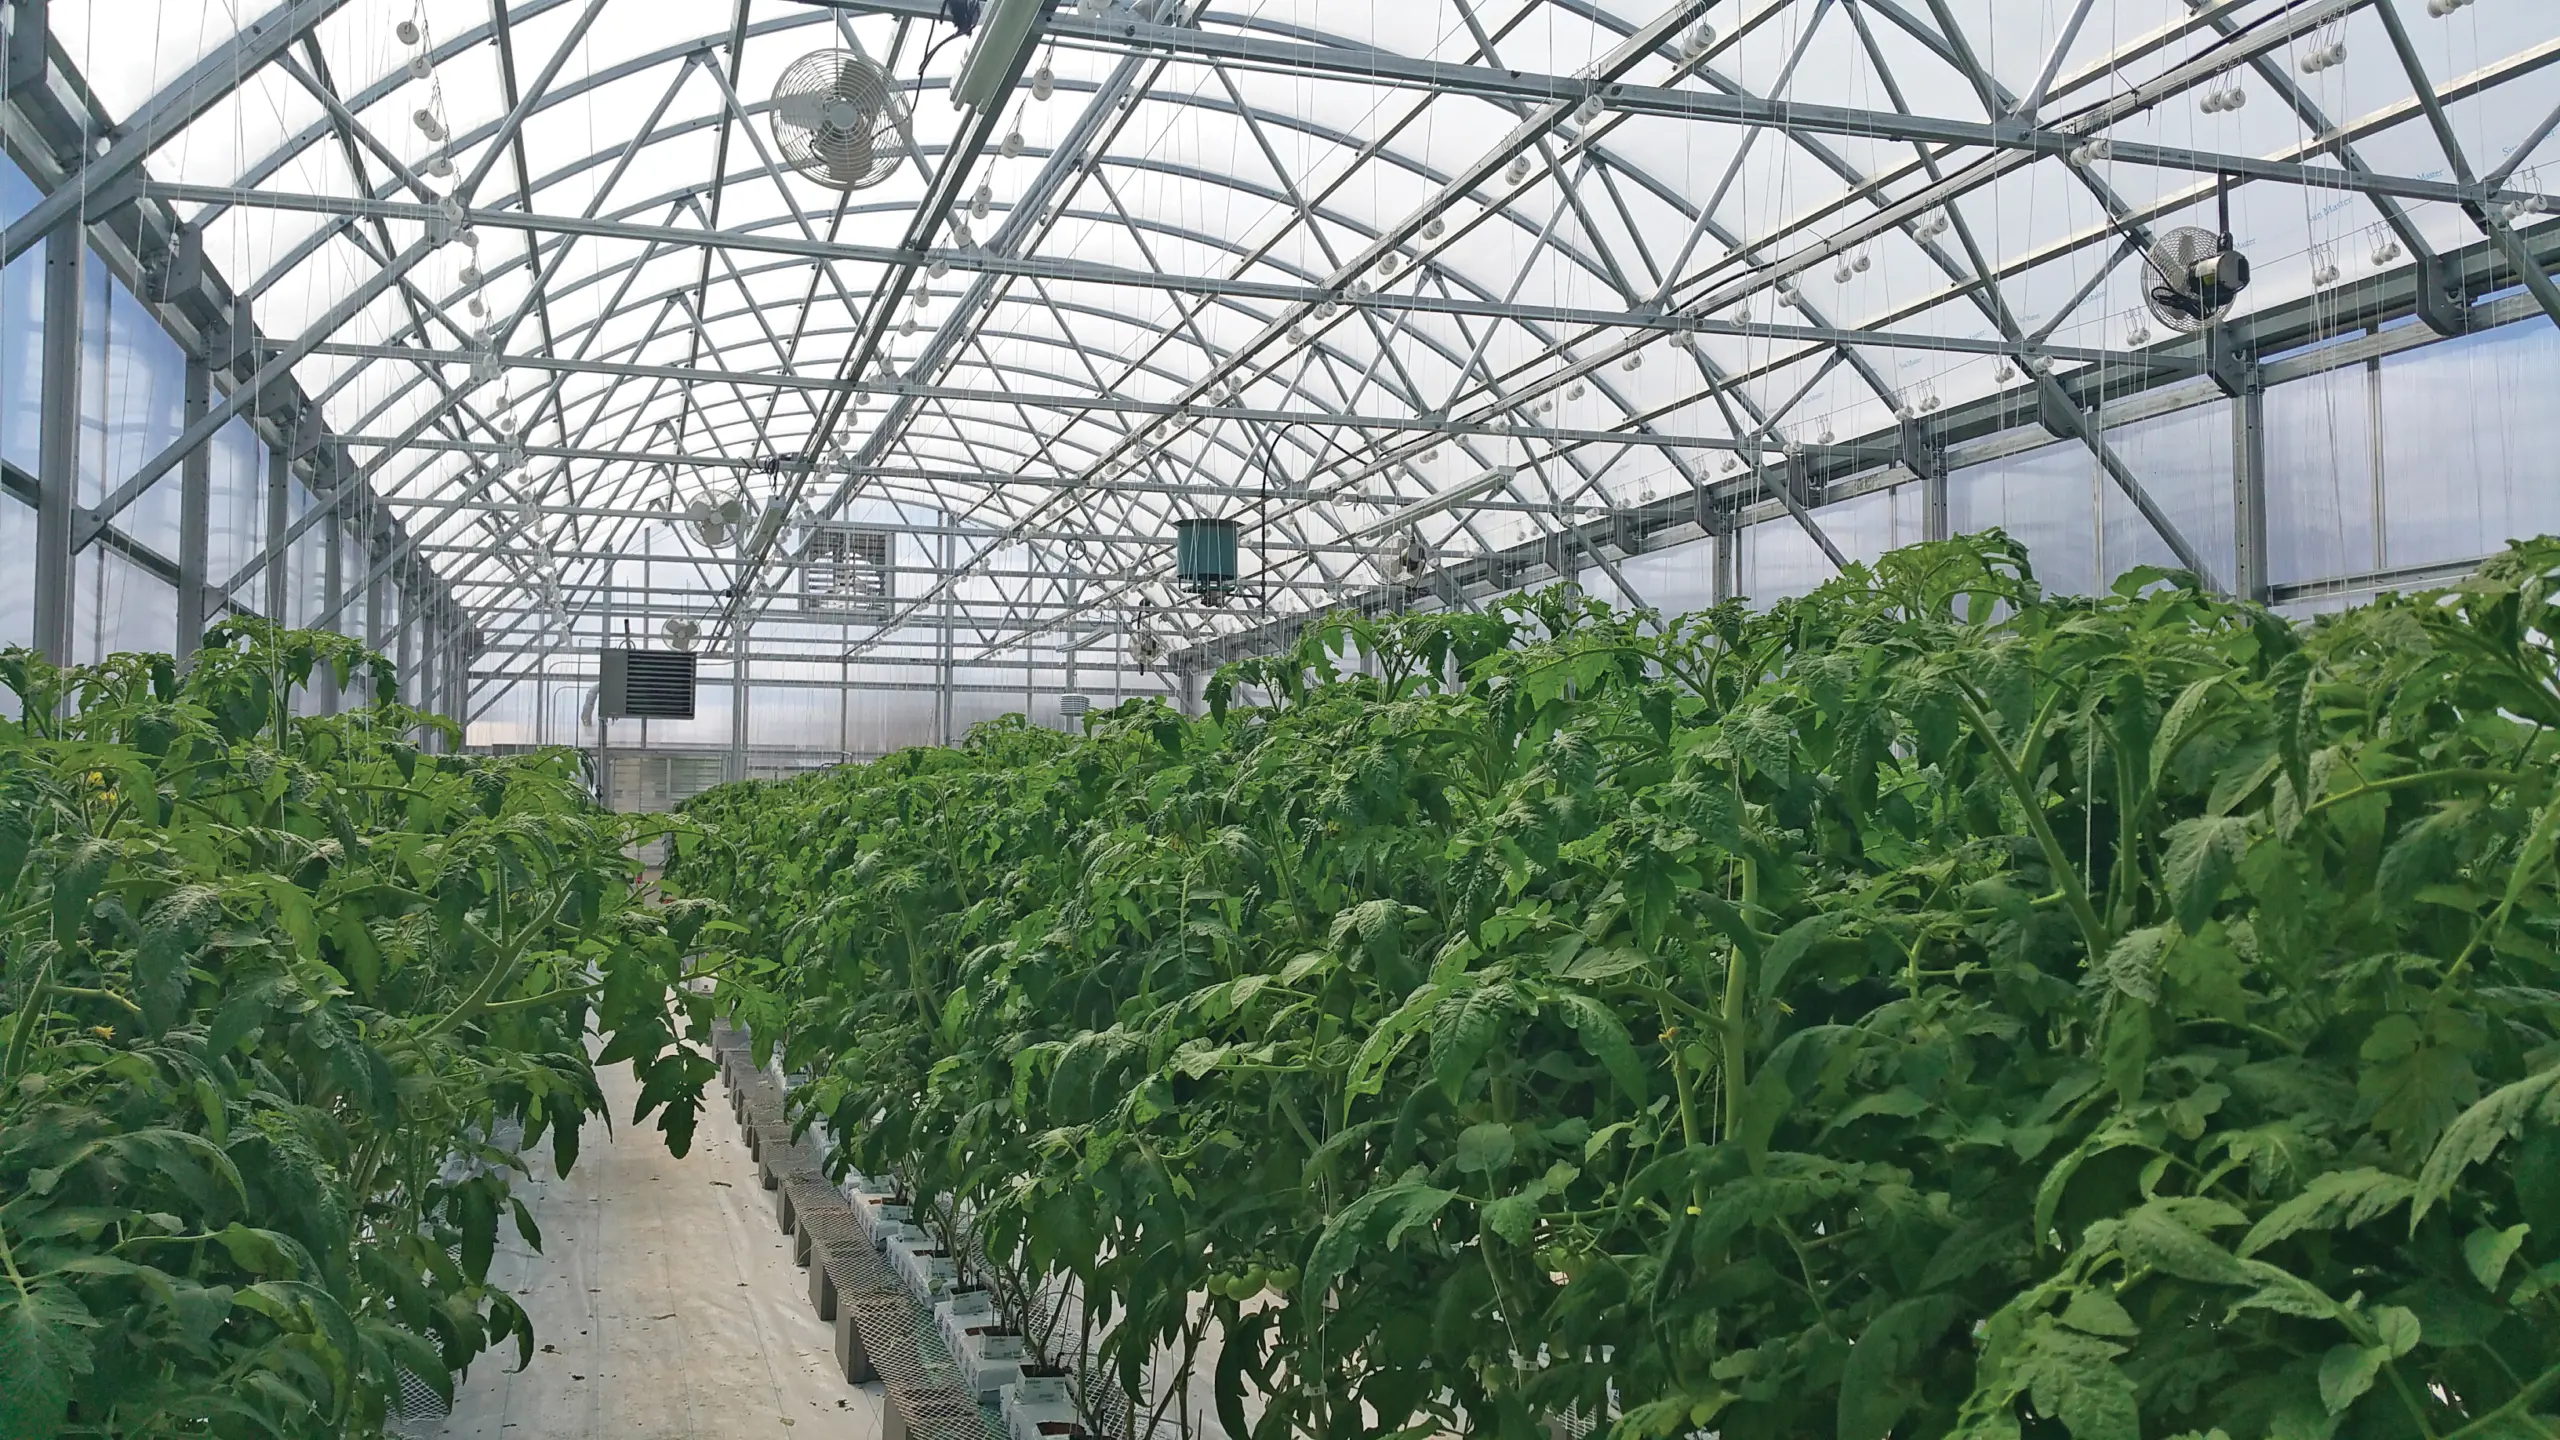 Looking To Operate A Year-Round Greenhouse? Here's How